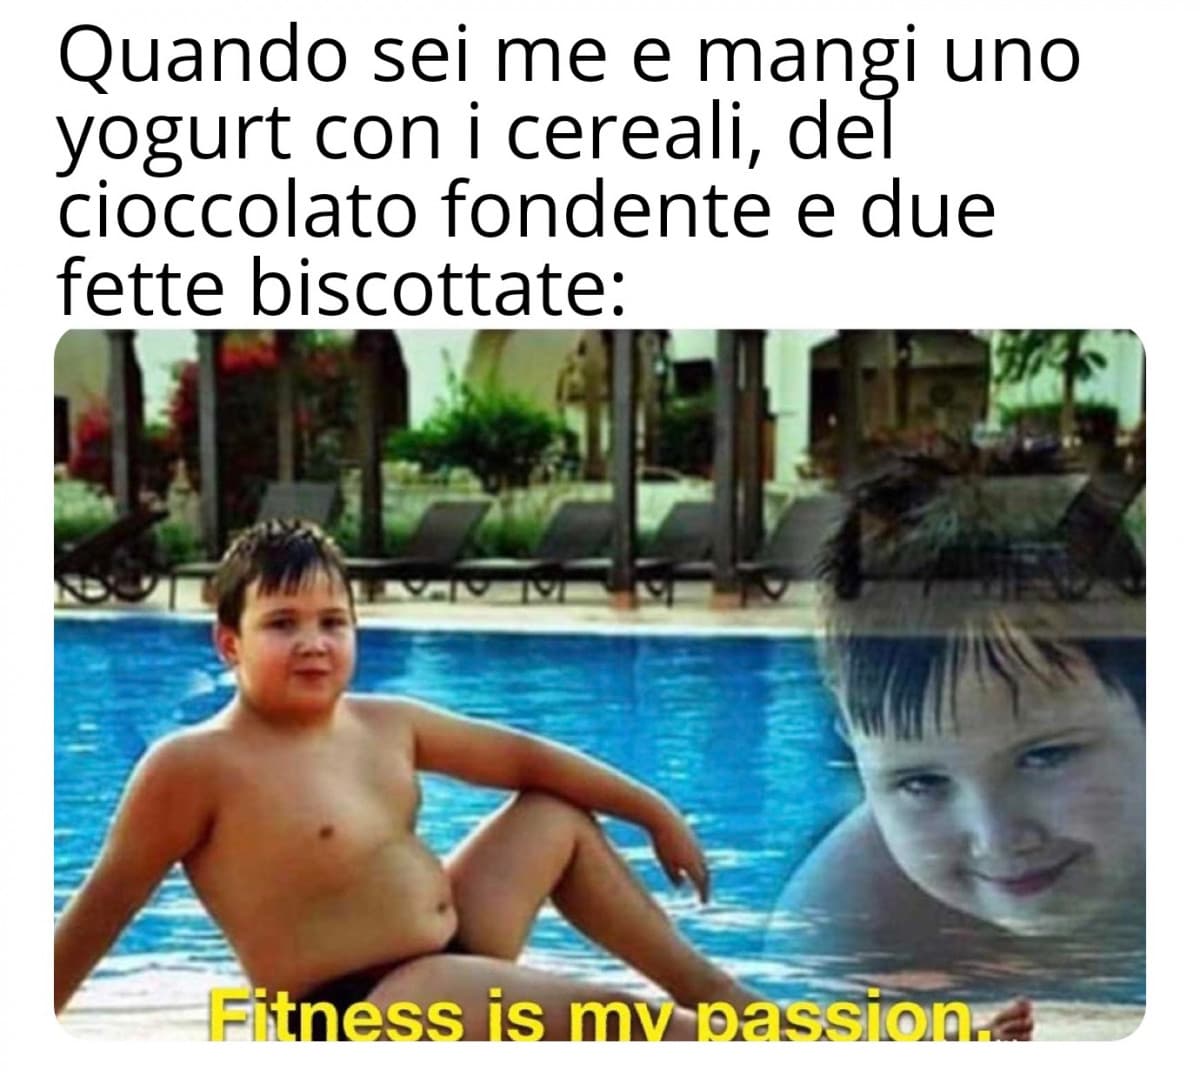 Fitness Is my passion